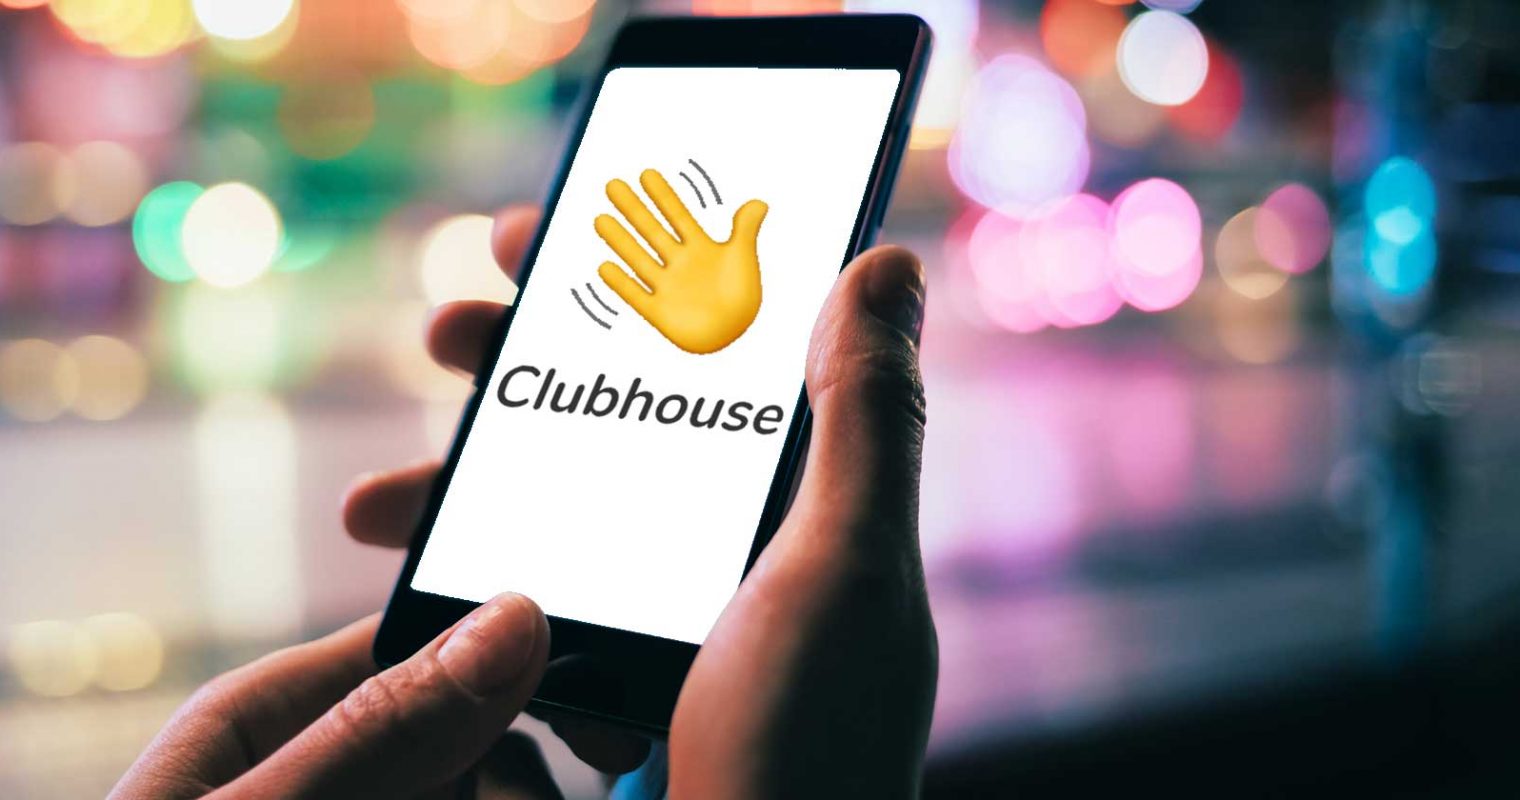 Hackers Made Public Data on 1.3 Million Clubhouse Users